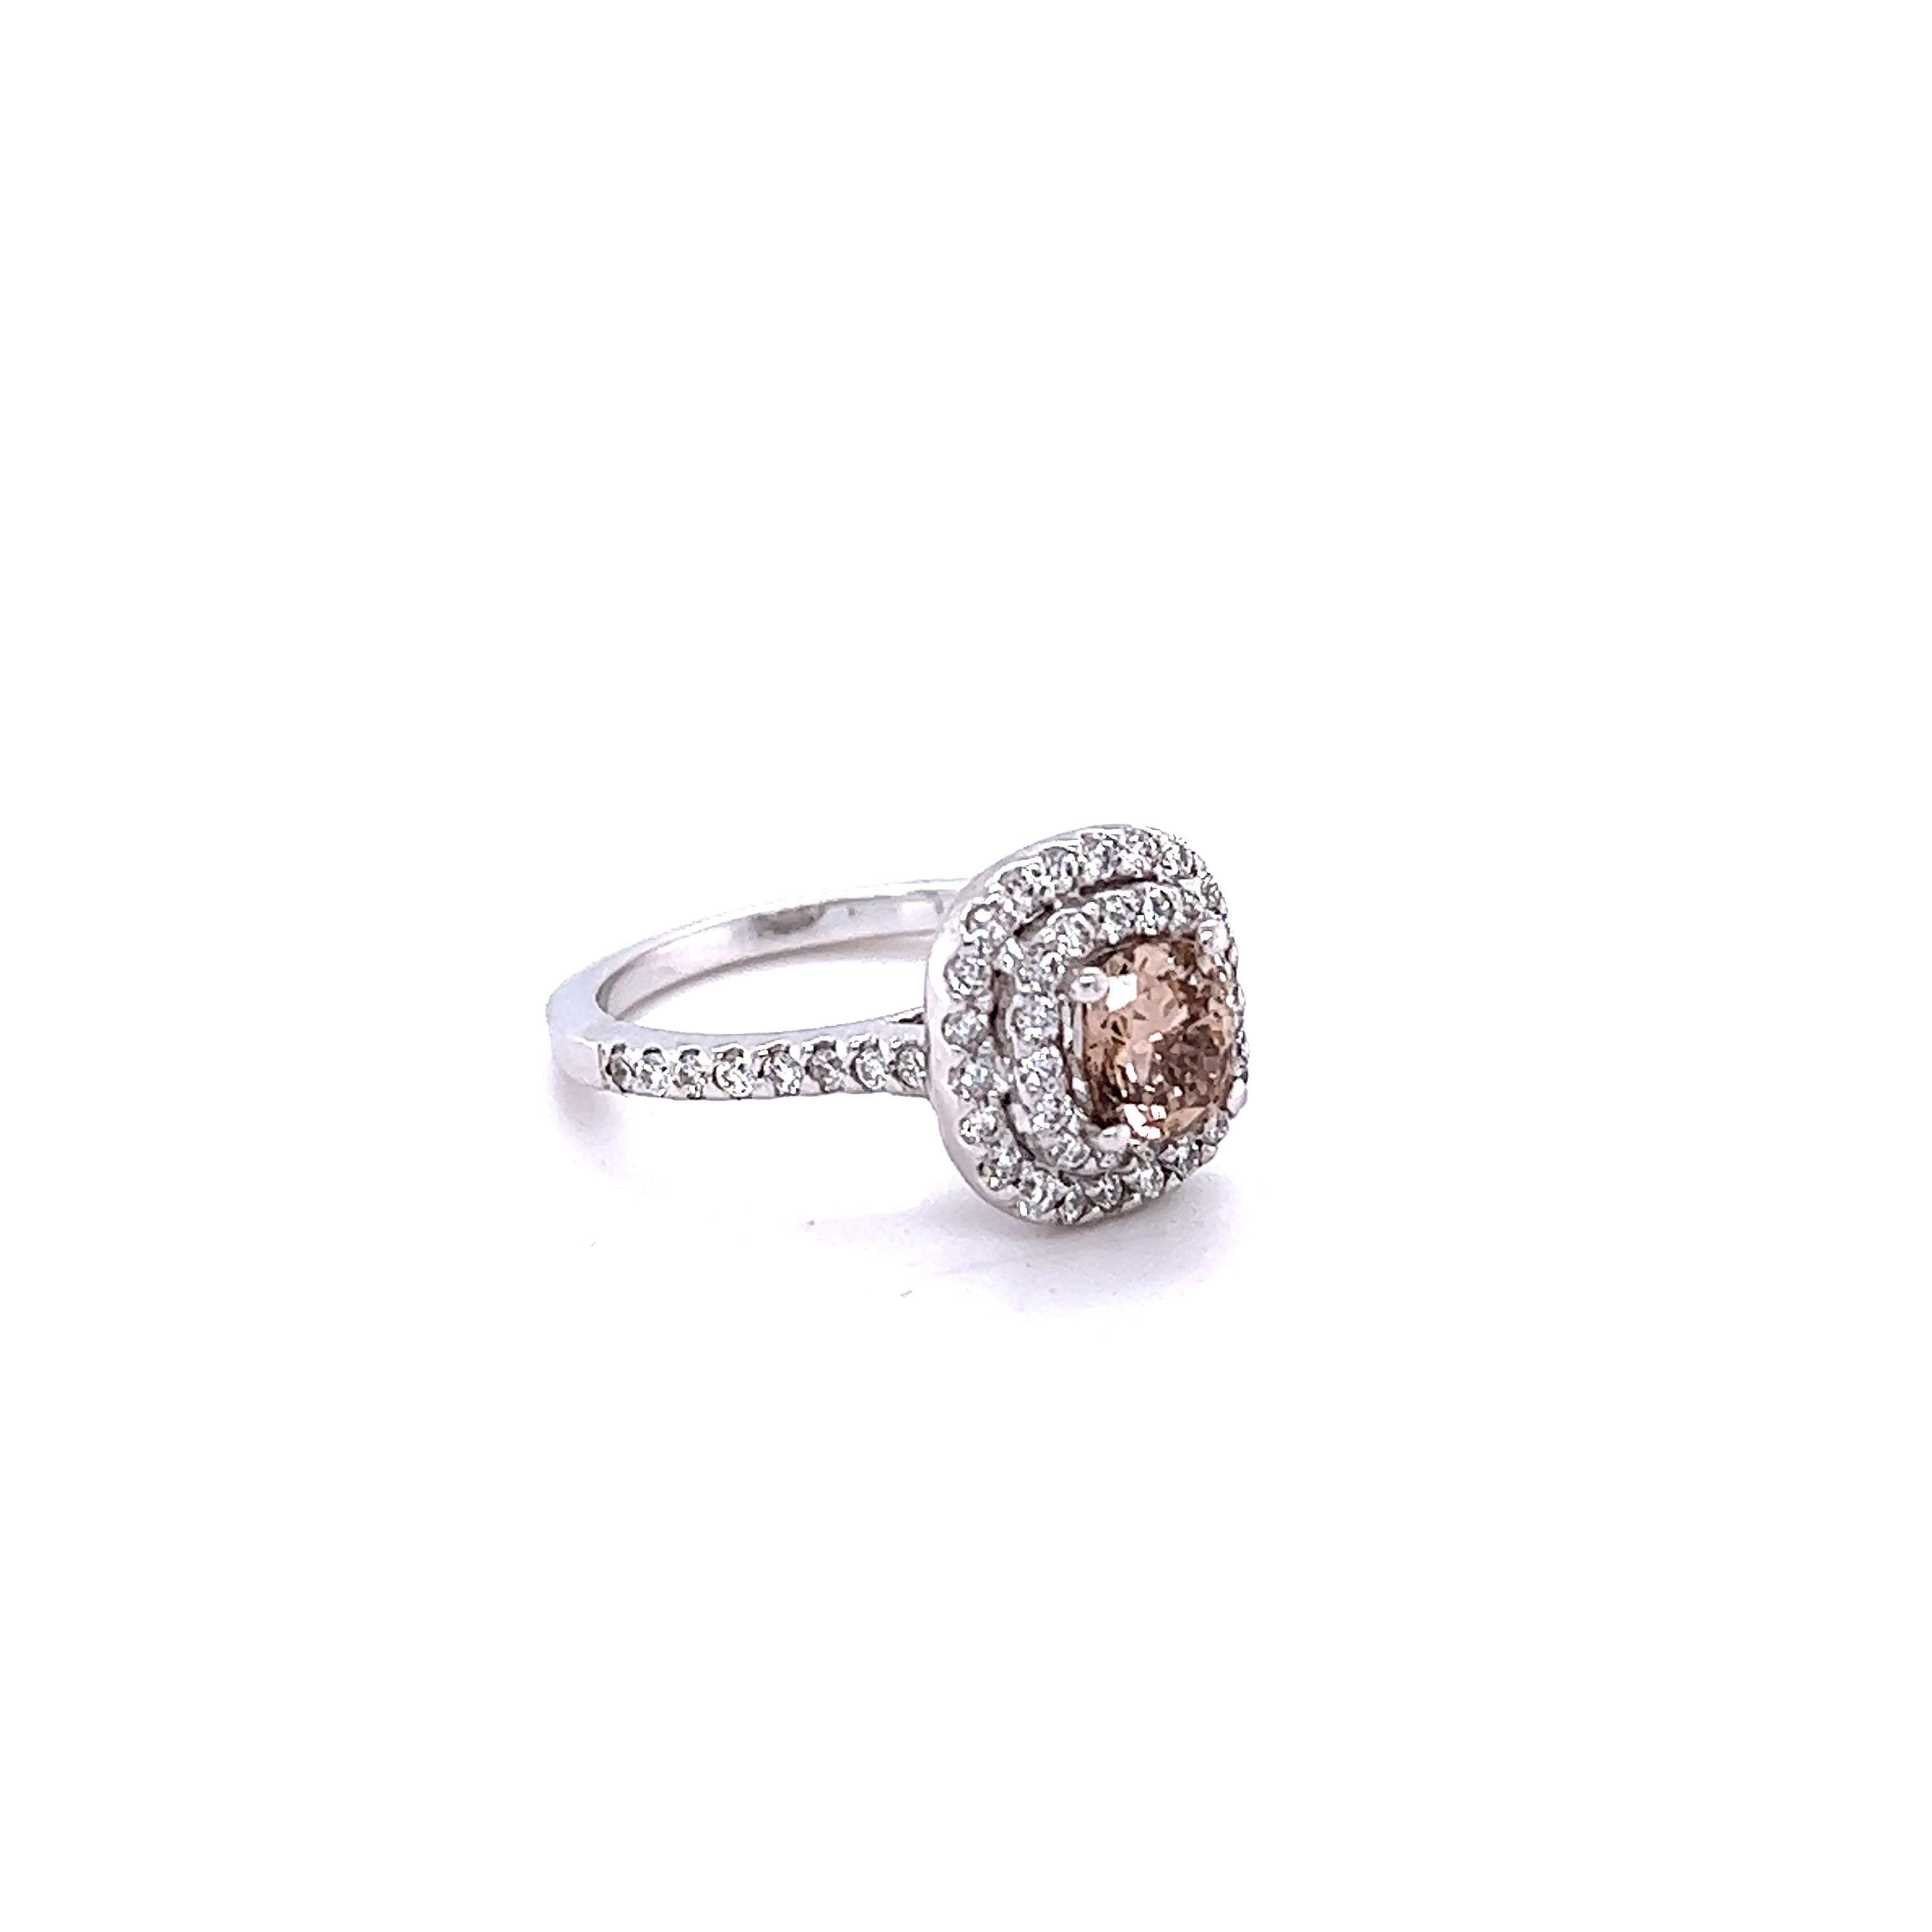 This ring has a Natural Cushion Cut Champagne Brown Diamond that weighs 0.95 carats and has a clarity of VS. It is surrounded by 54 Round Cut White Diamonds that weigh 0.58 carats and have a clarity of VS and color of F. 
The center champagne